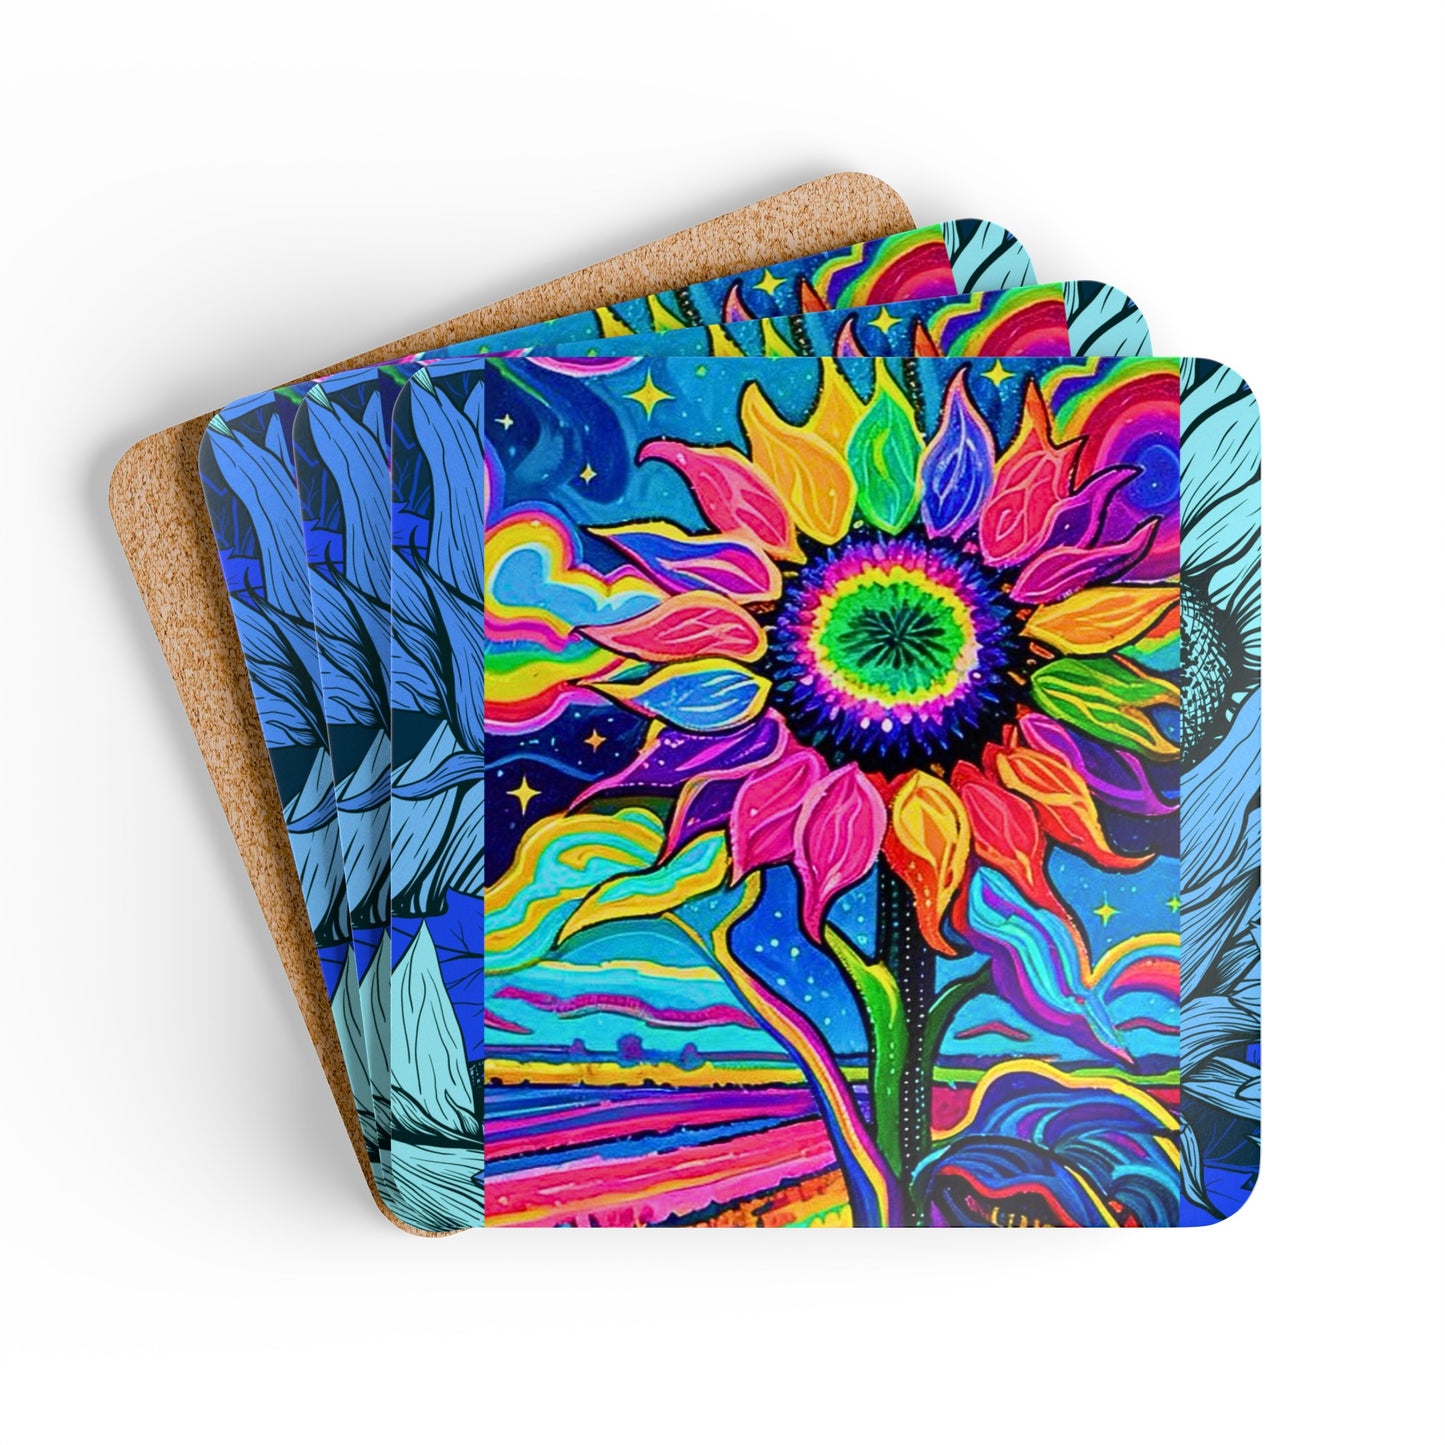 Electric Sunflower Collage Cocktail Party Beverage Corkwood Coaster Set